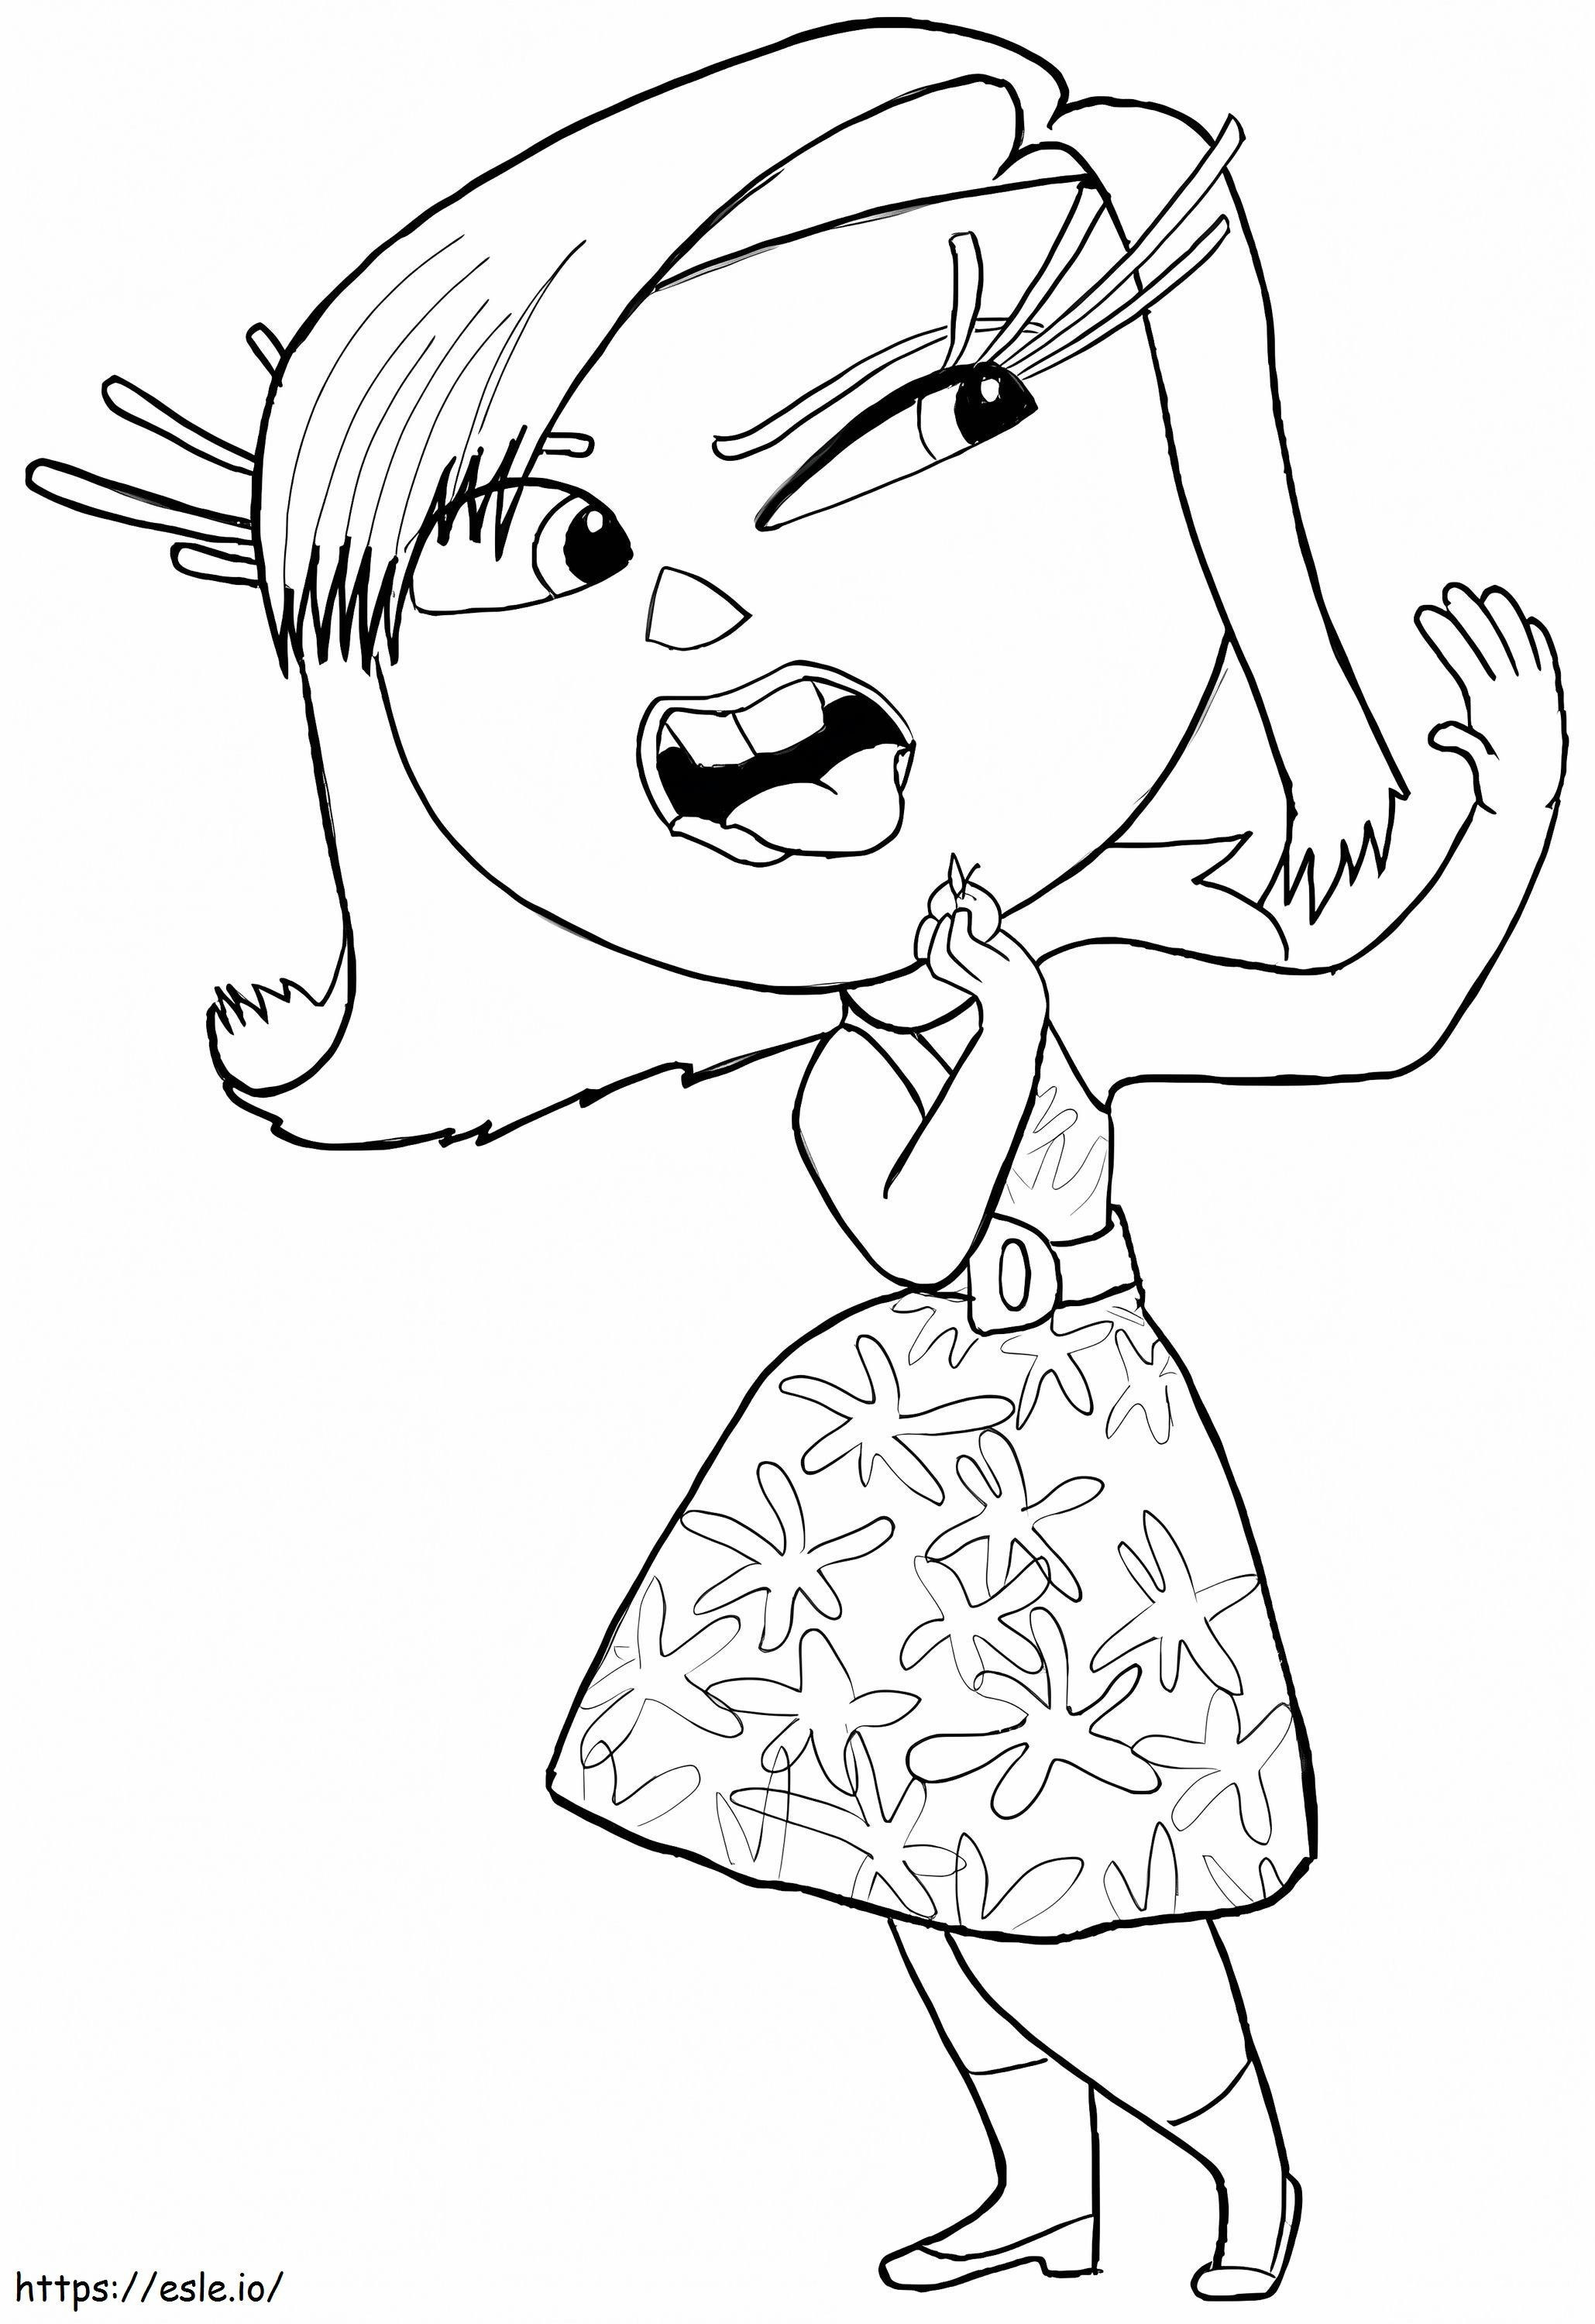 Inside Out Disgust coloring page